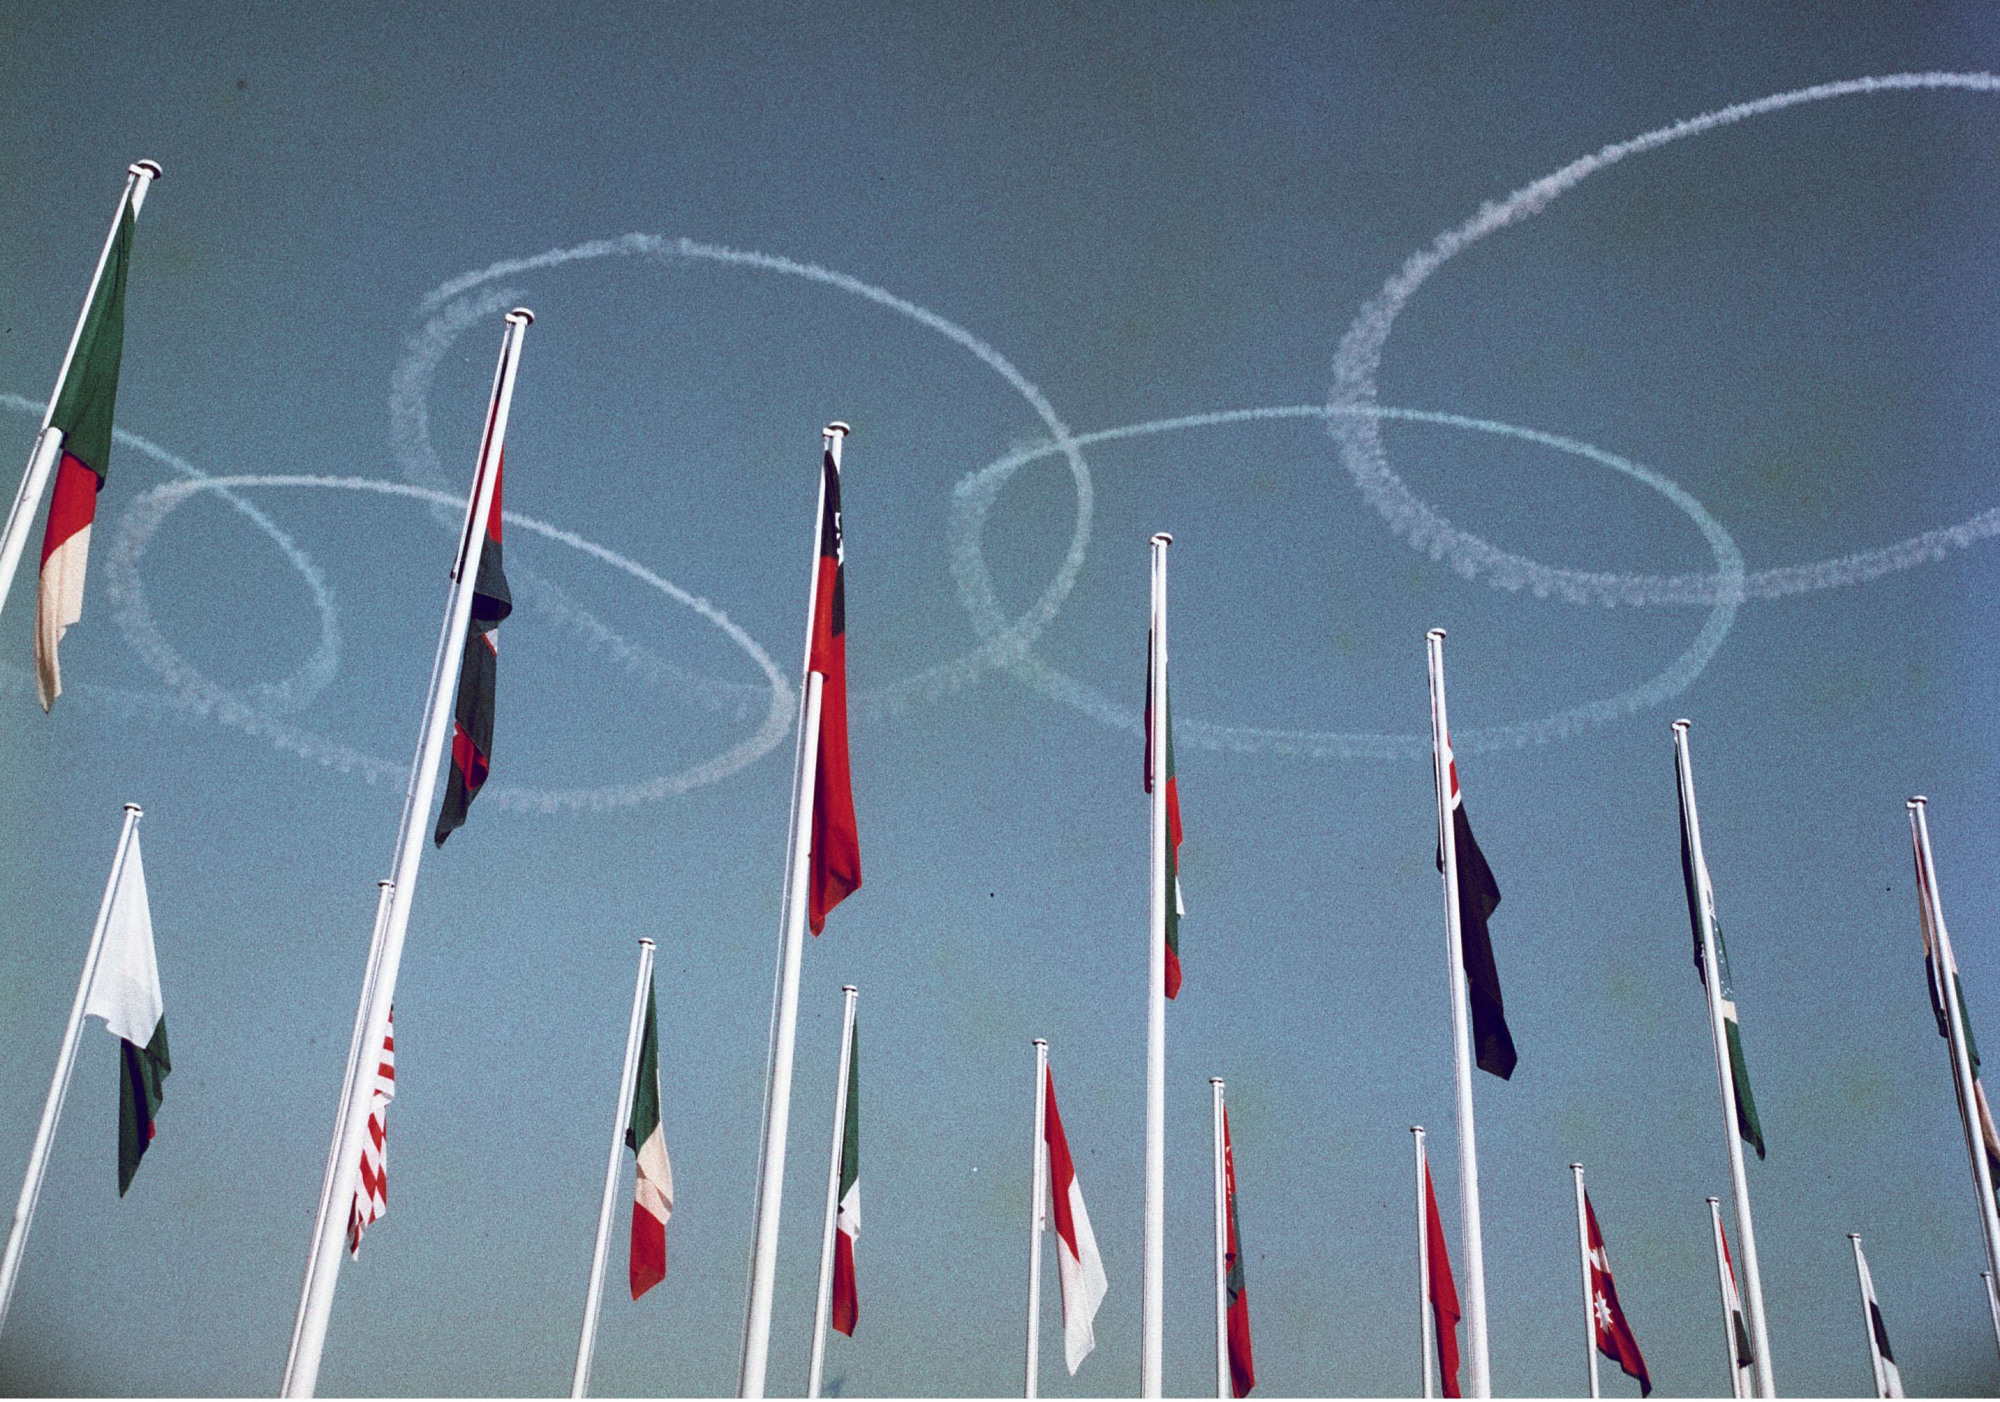 File:Five Olympic Rings - geograph.org.uk - 3030600.jpg - Wikimedia Commons